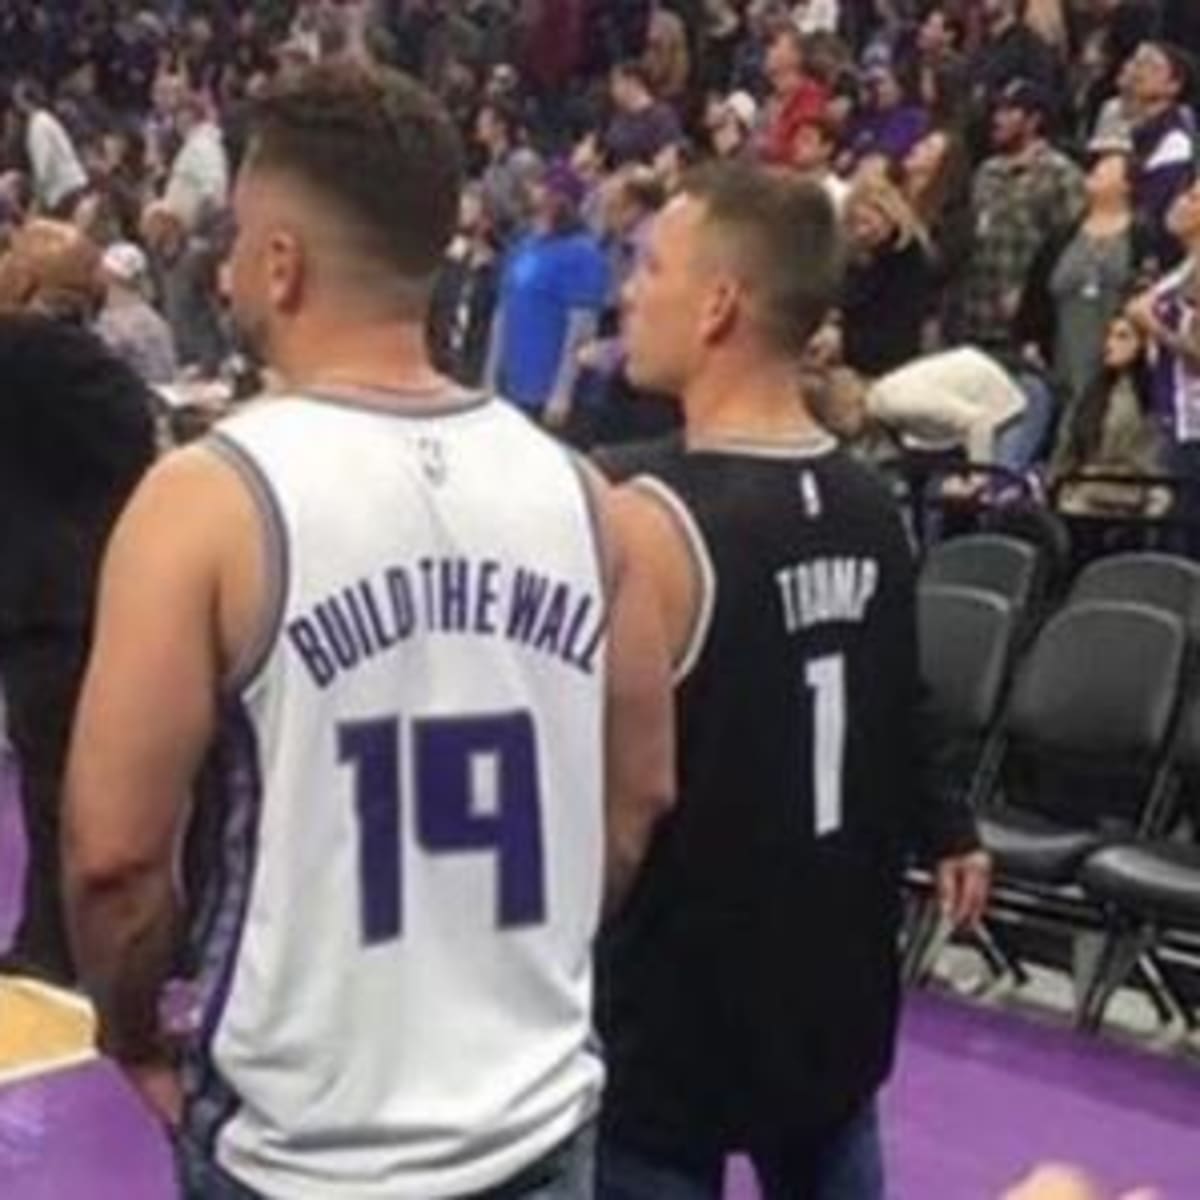 Sacramento Kings Fans Who Wore 'Build the Wall' Jerseys to Game